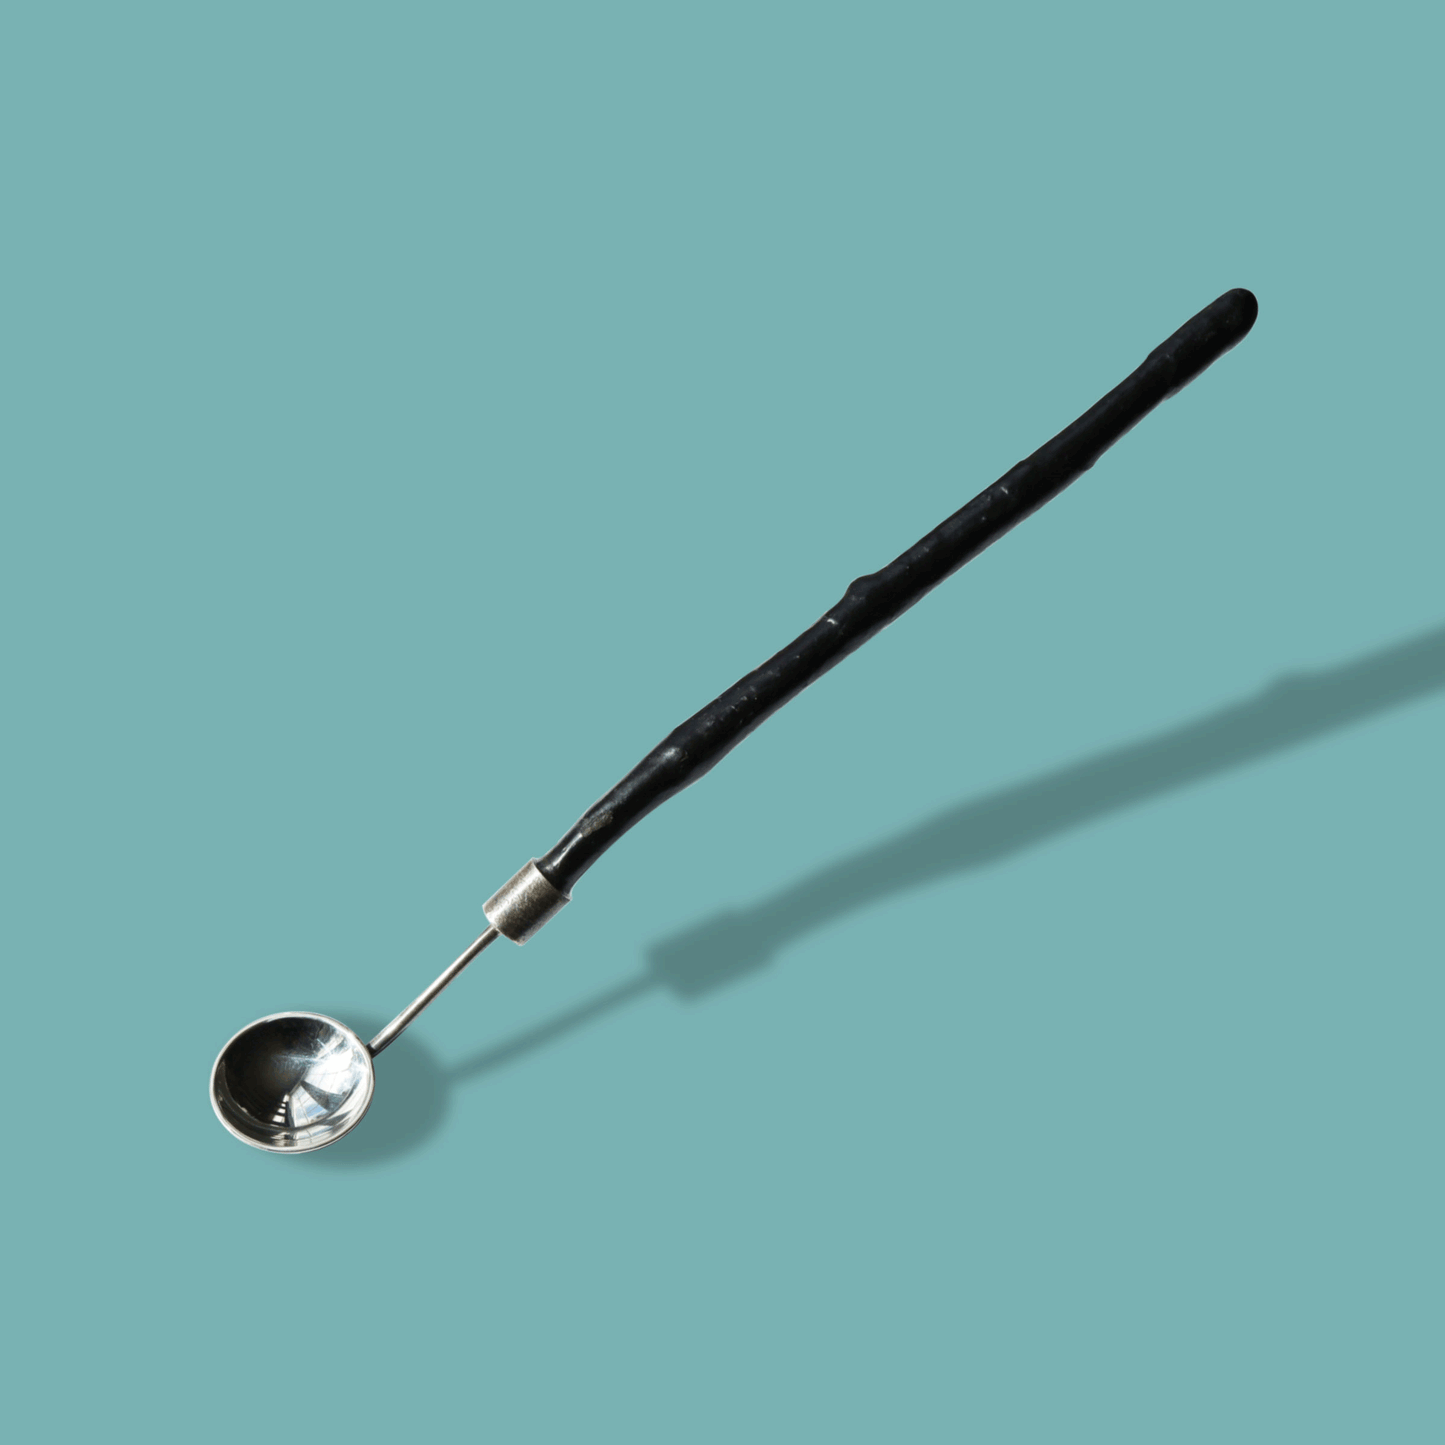 Spoon 2 in Sterling Silver and Charred Wood